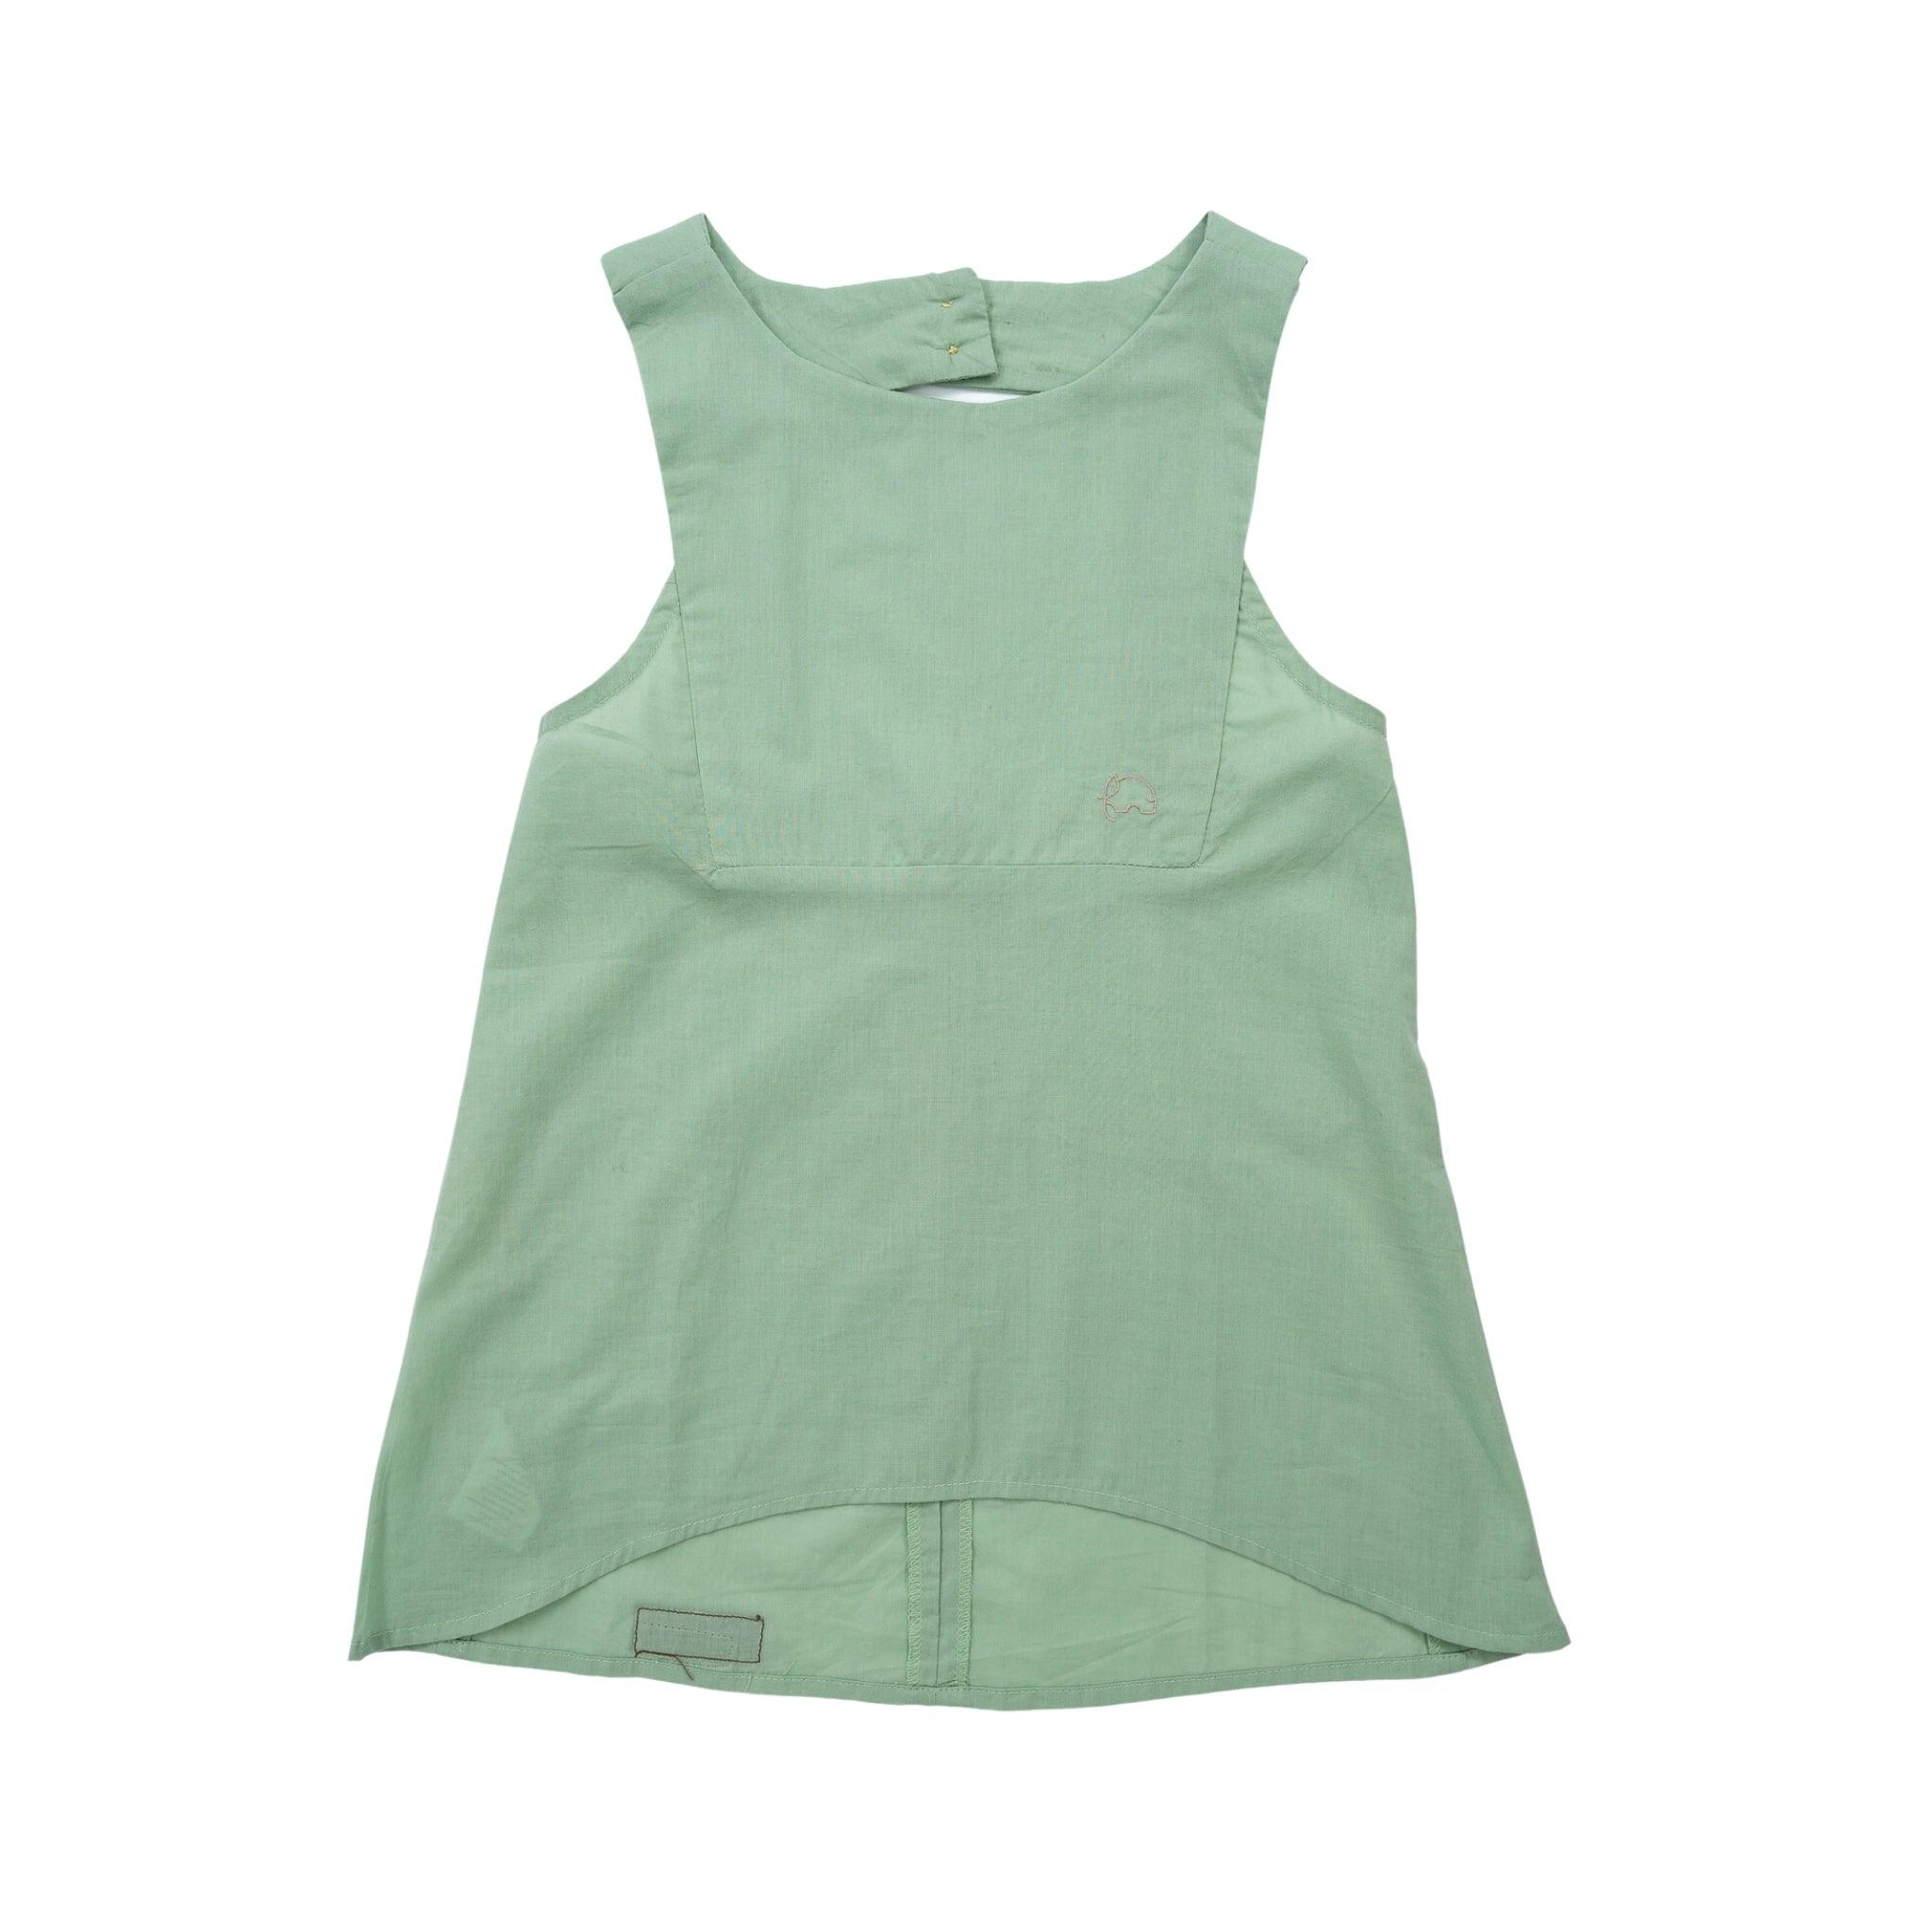 A Smoke Green Cotton Bib Neck Top for kids by Karee, with panel details, photographed against a white background.